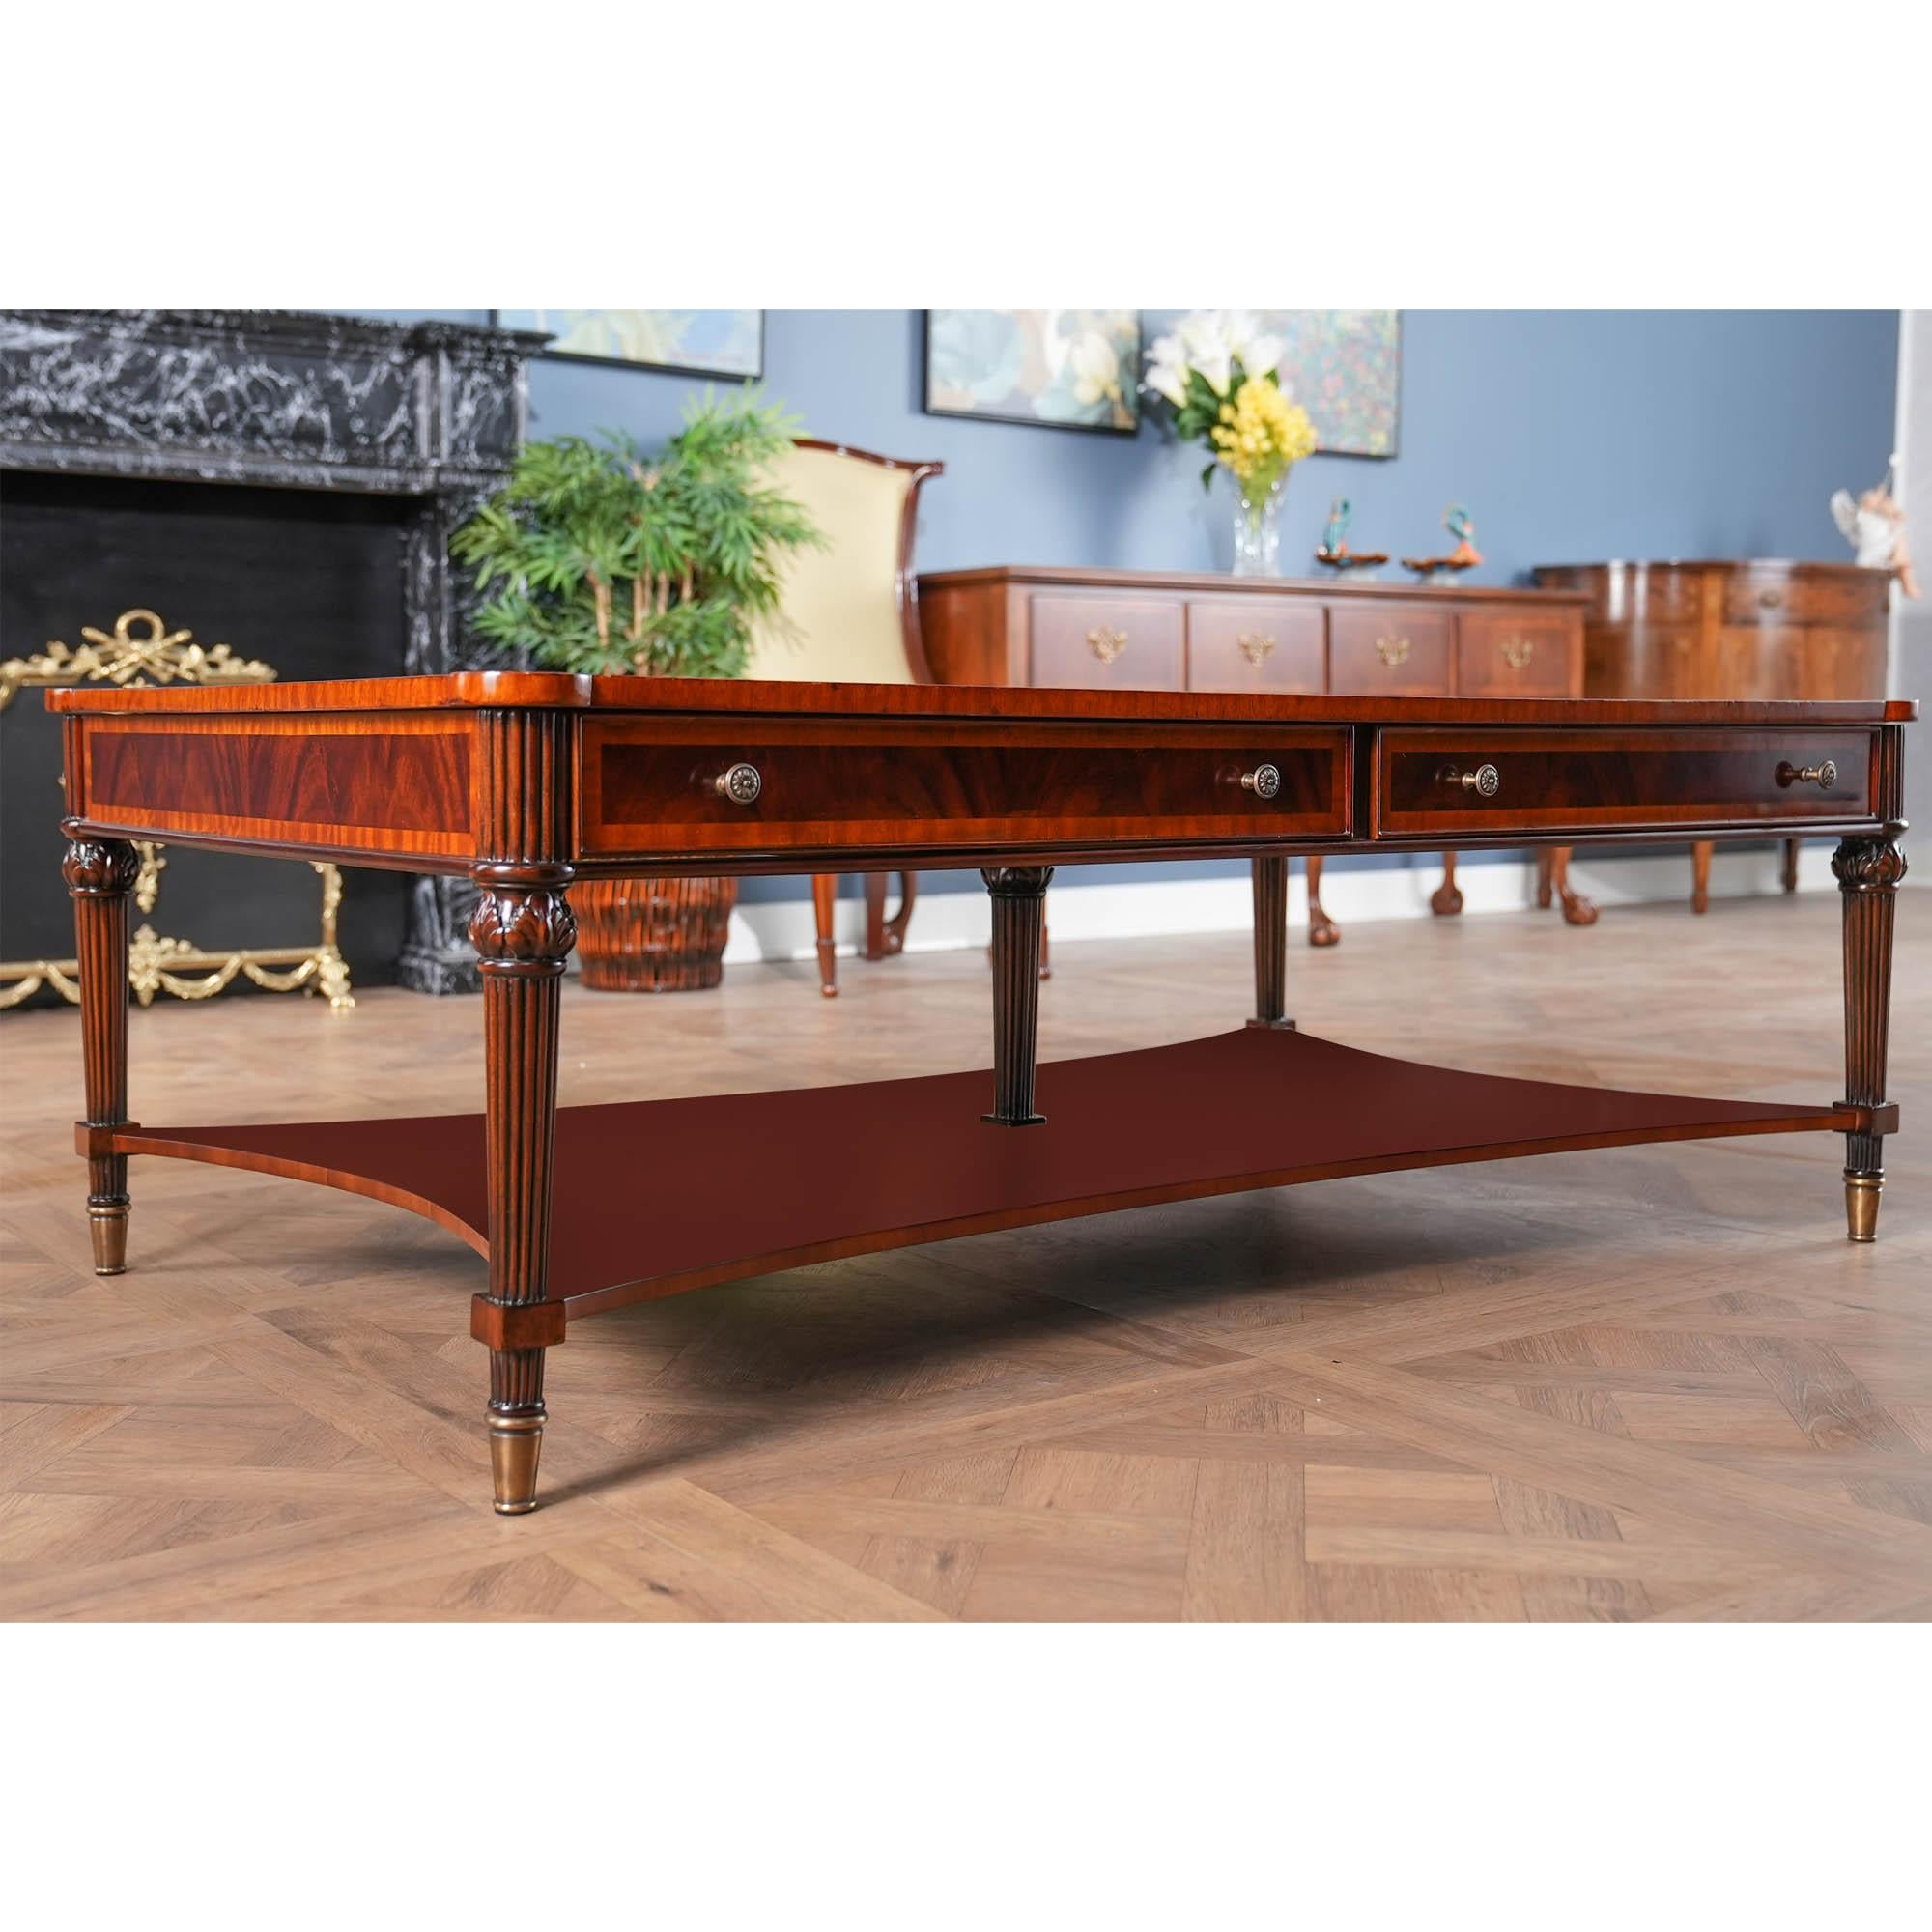 A Large Coffee Table from Niagara Furniture with all of the bells and whistles including four drawers, reeded legs, solid brass capped feet and cookie shaped, rounded corners. Great quality construction and attention to detail make this a